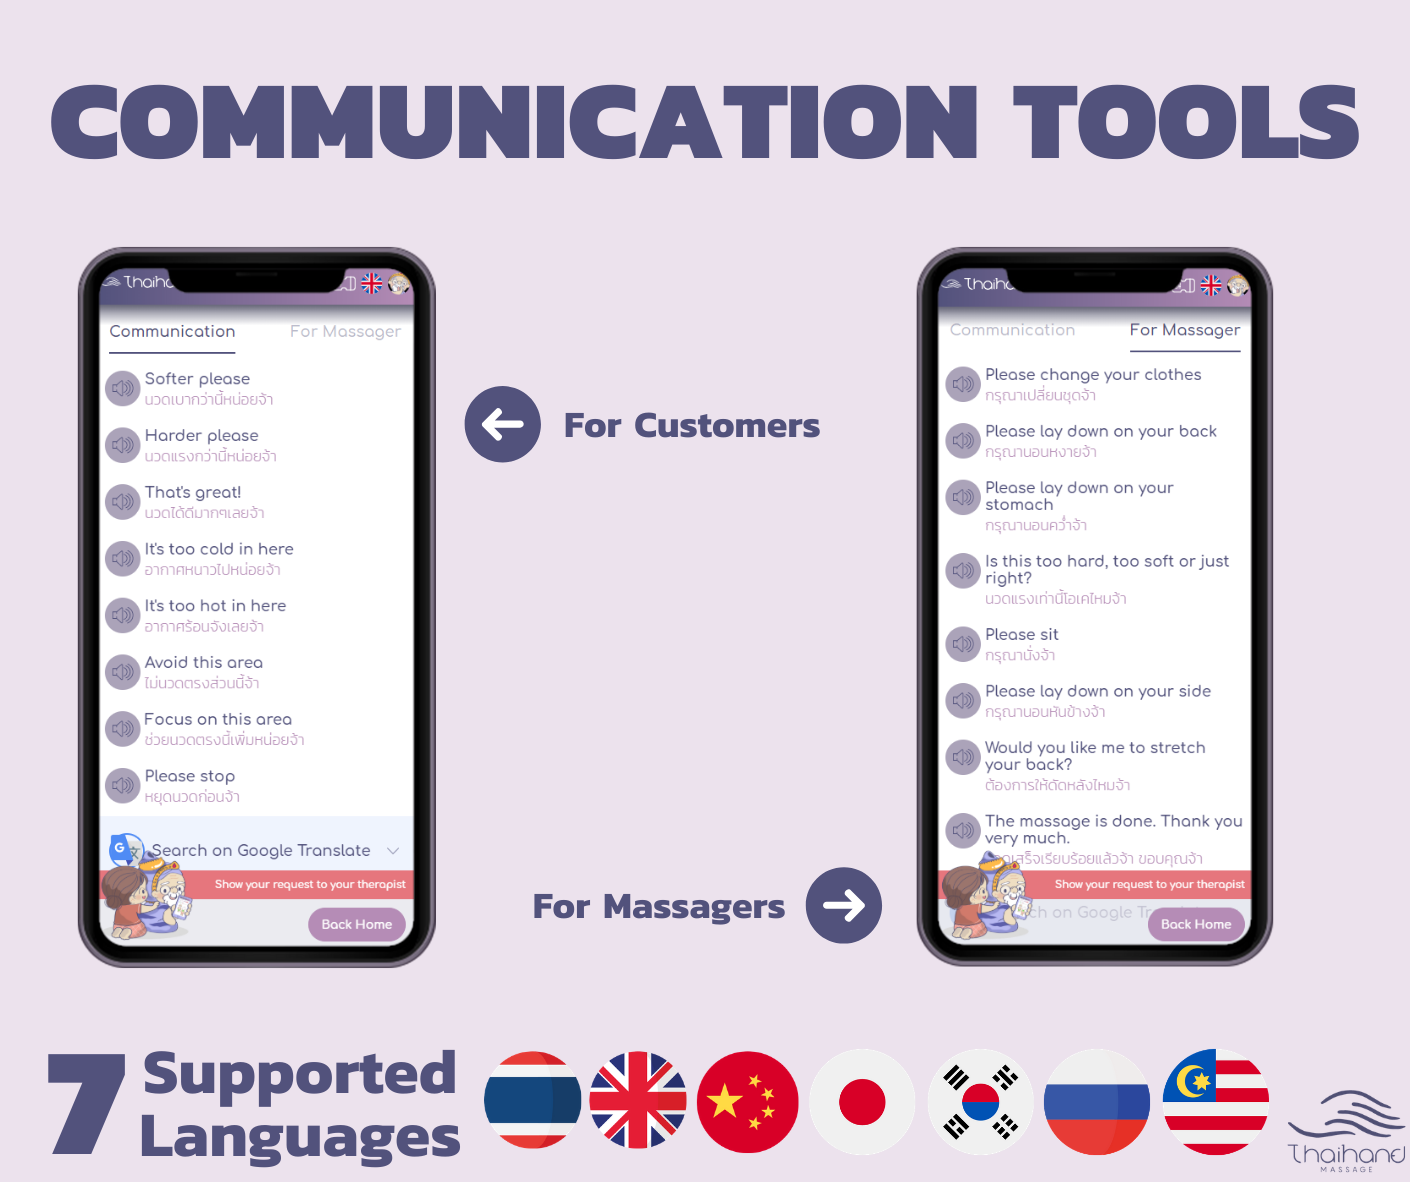 Communication Tools supported 7 languages